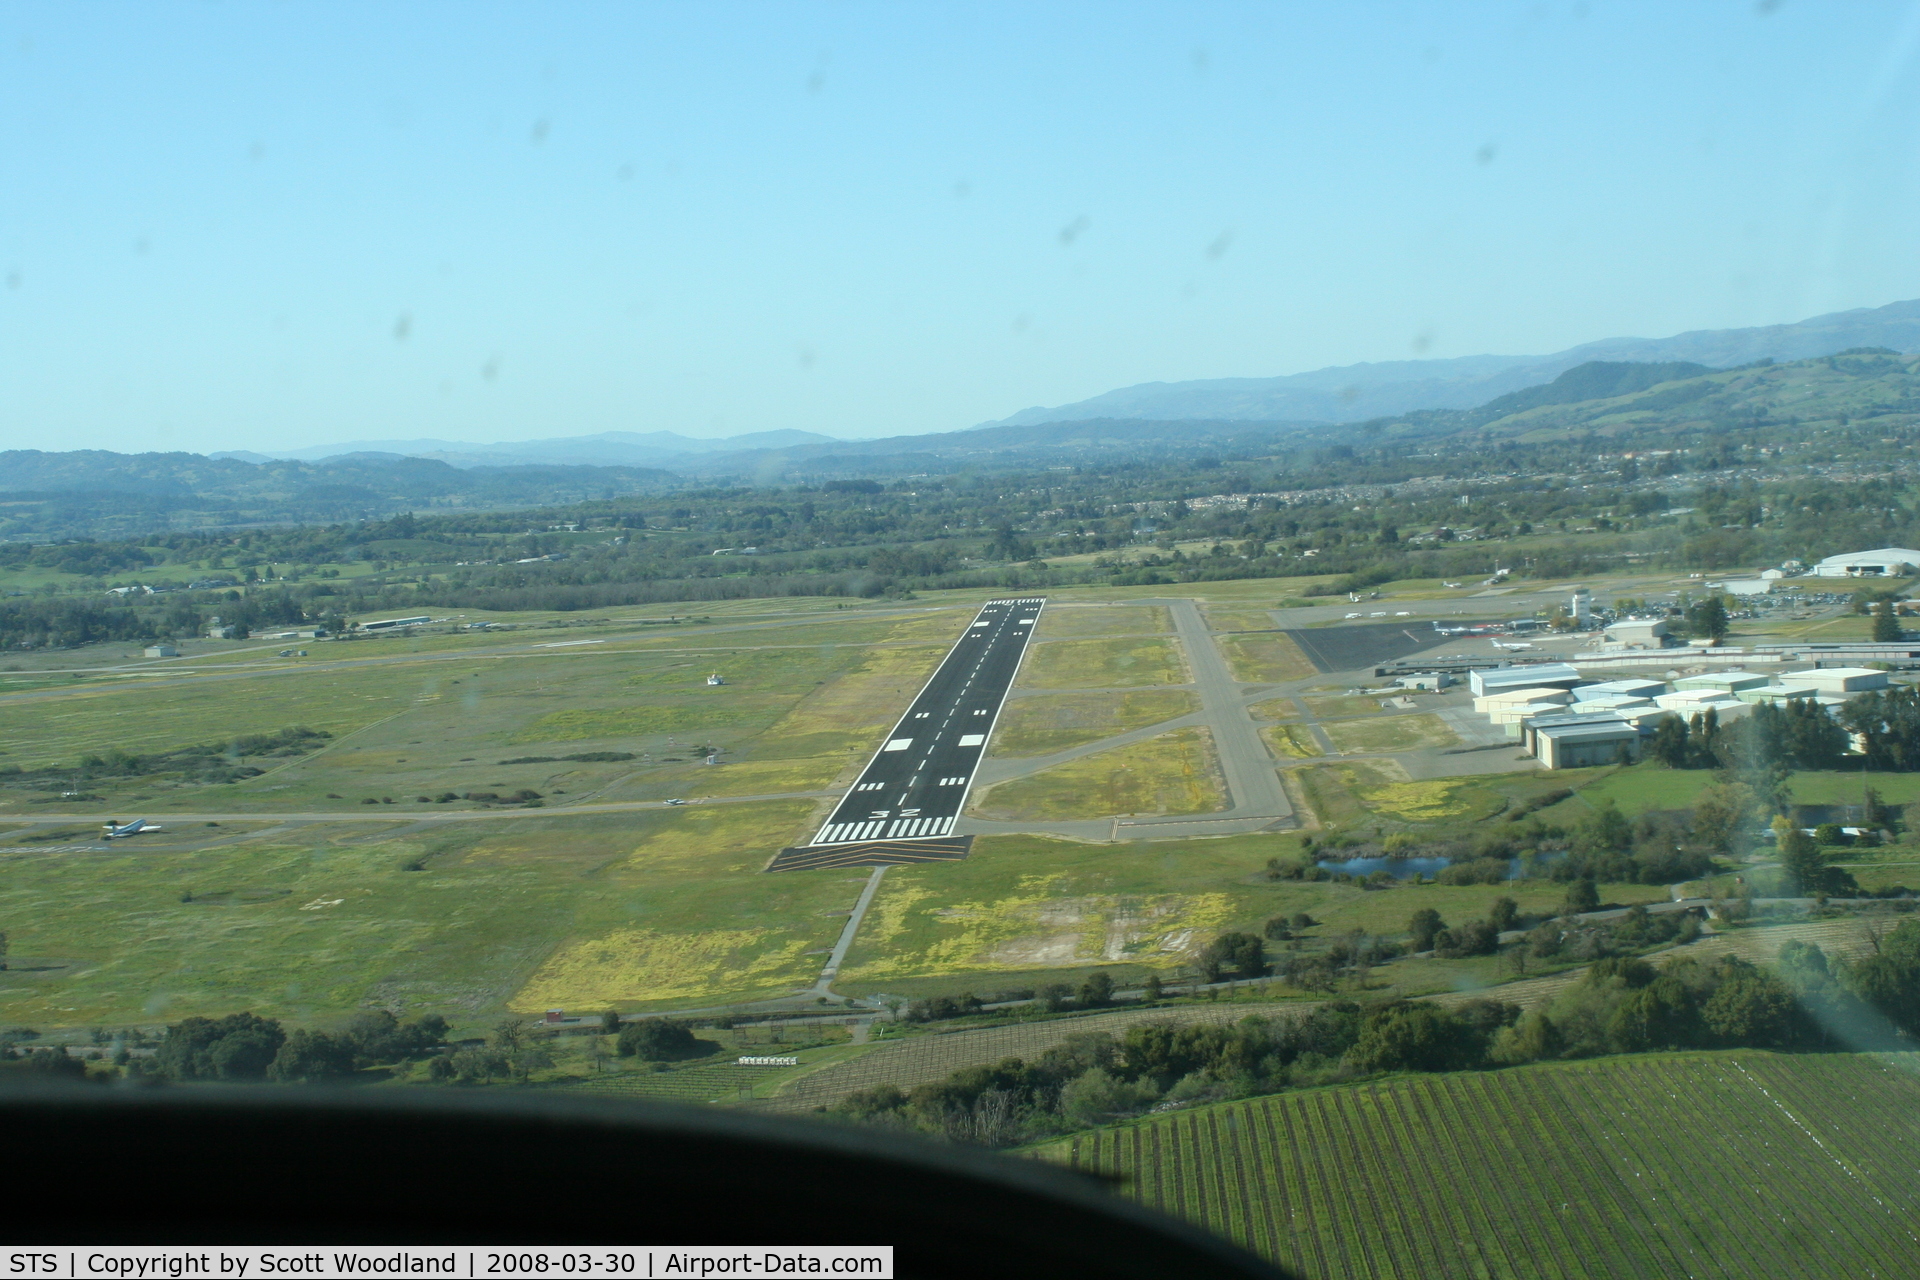 Charles M. Schulz - Sonoma County Airport (STS) - Approach to Runway 32